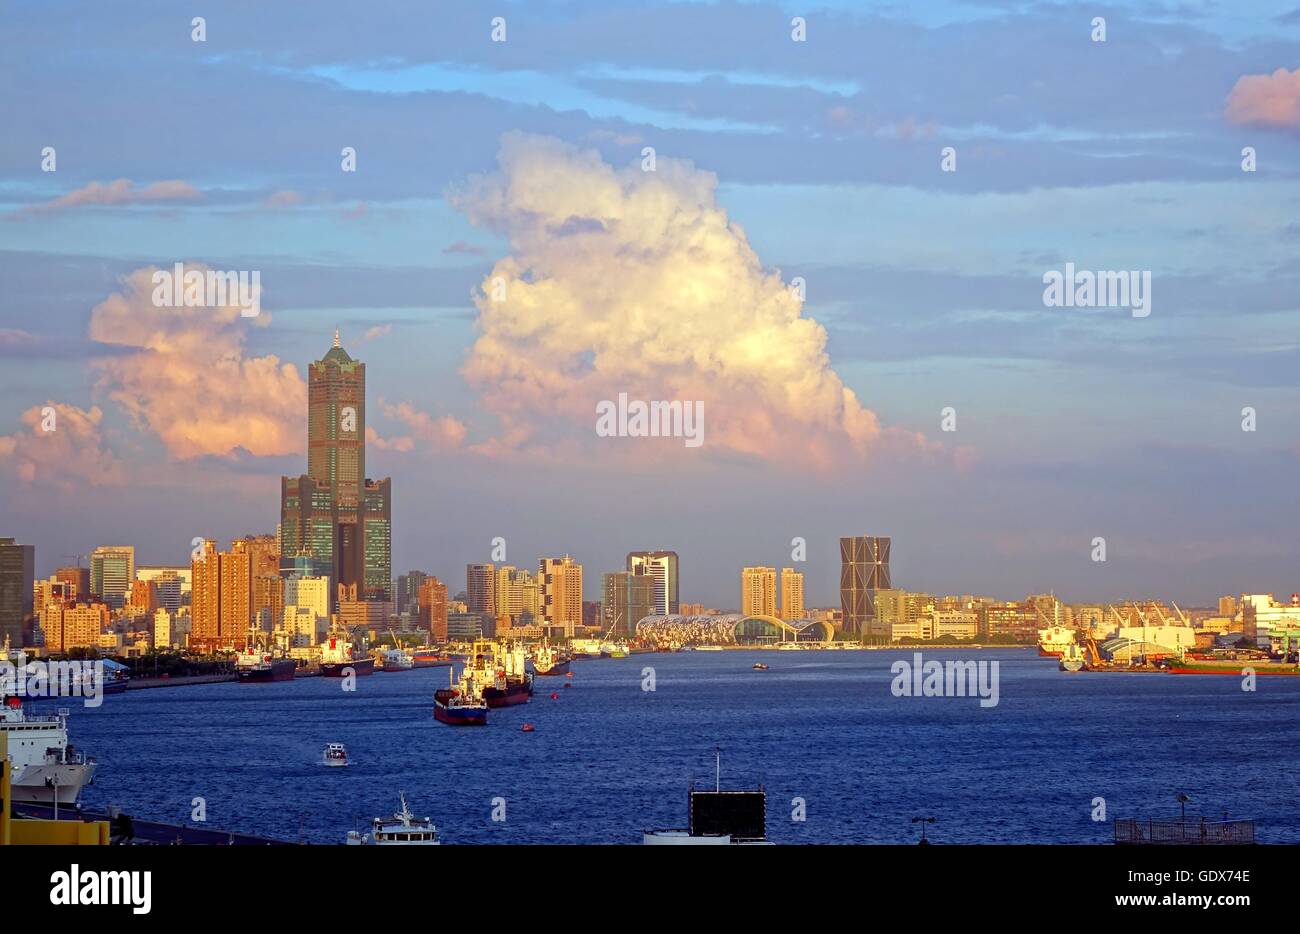 Beautiful view of the port and skyline of Kaohsiung in southern Taiwan Stock Photo